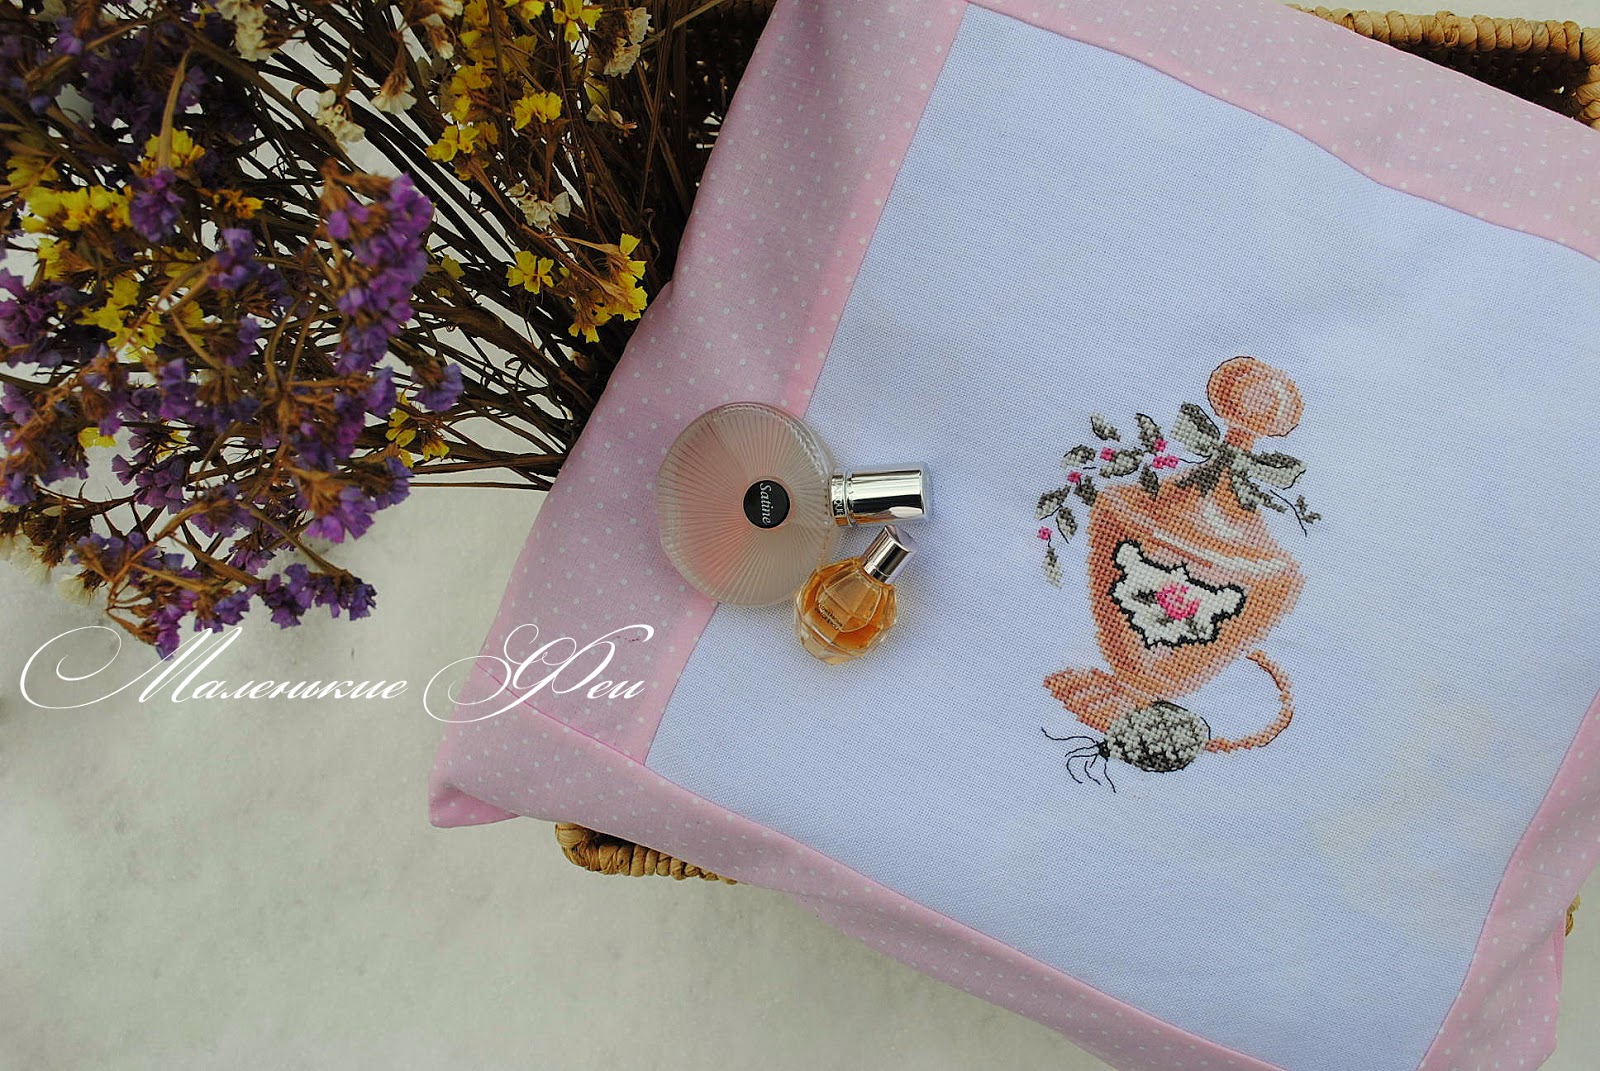 embroidery, cross-stitch, embroidery cross, log, embroidery, French stories, the French embroidery, Designed by the French, the French Designer Builder, perfume, bottle of perfume, pillow, handmade pillowcase, embroidered pillow, embroidered pillow case, pillow handmade, rose, roses, pink